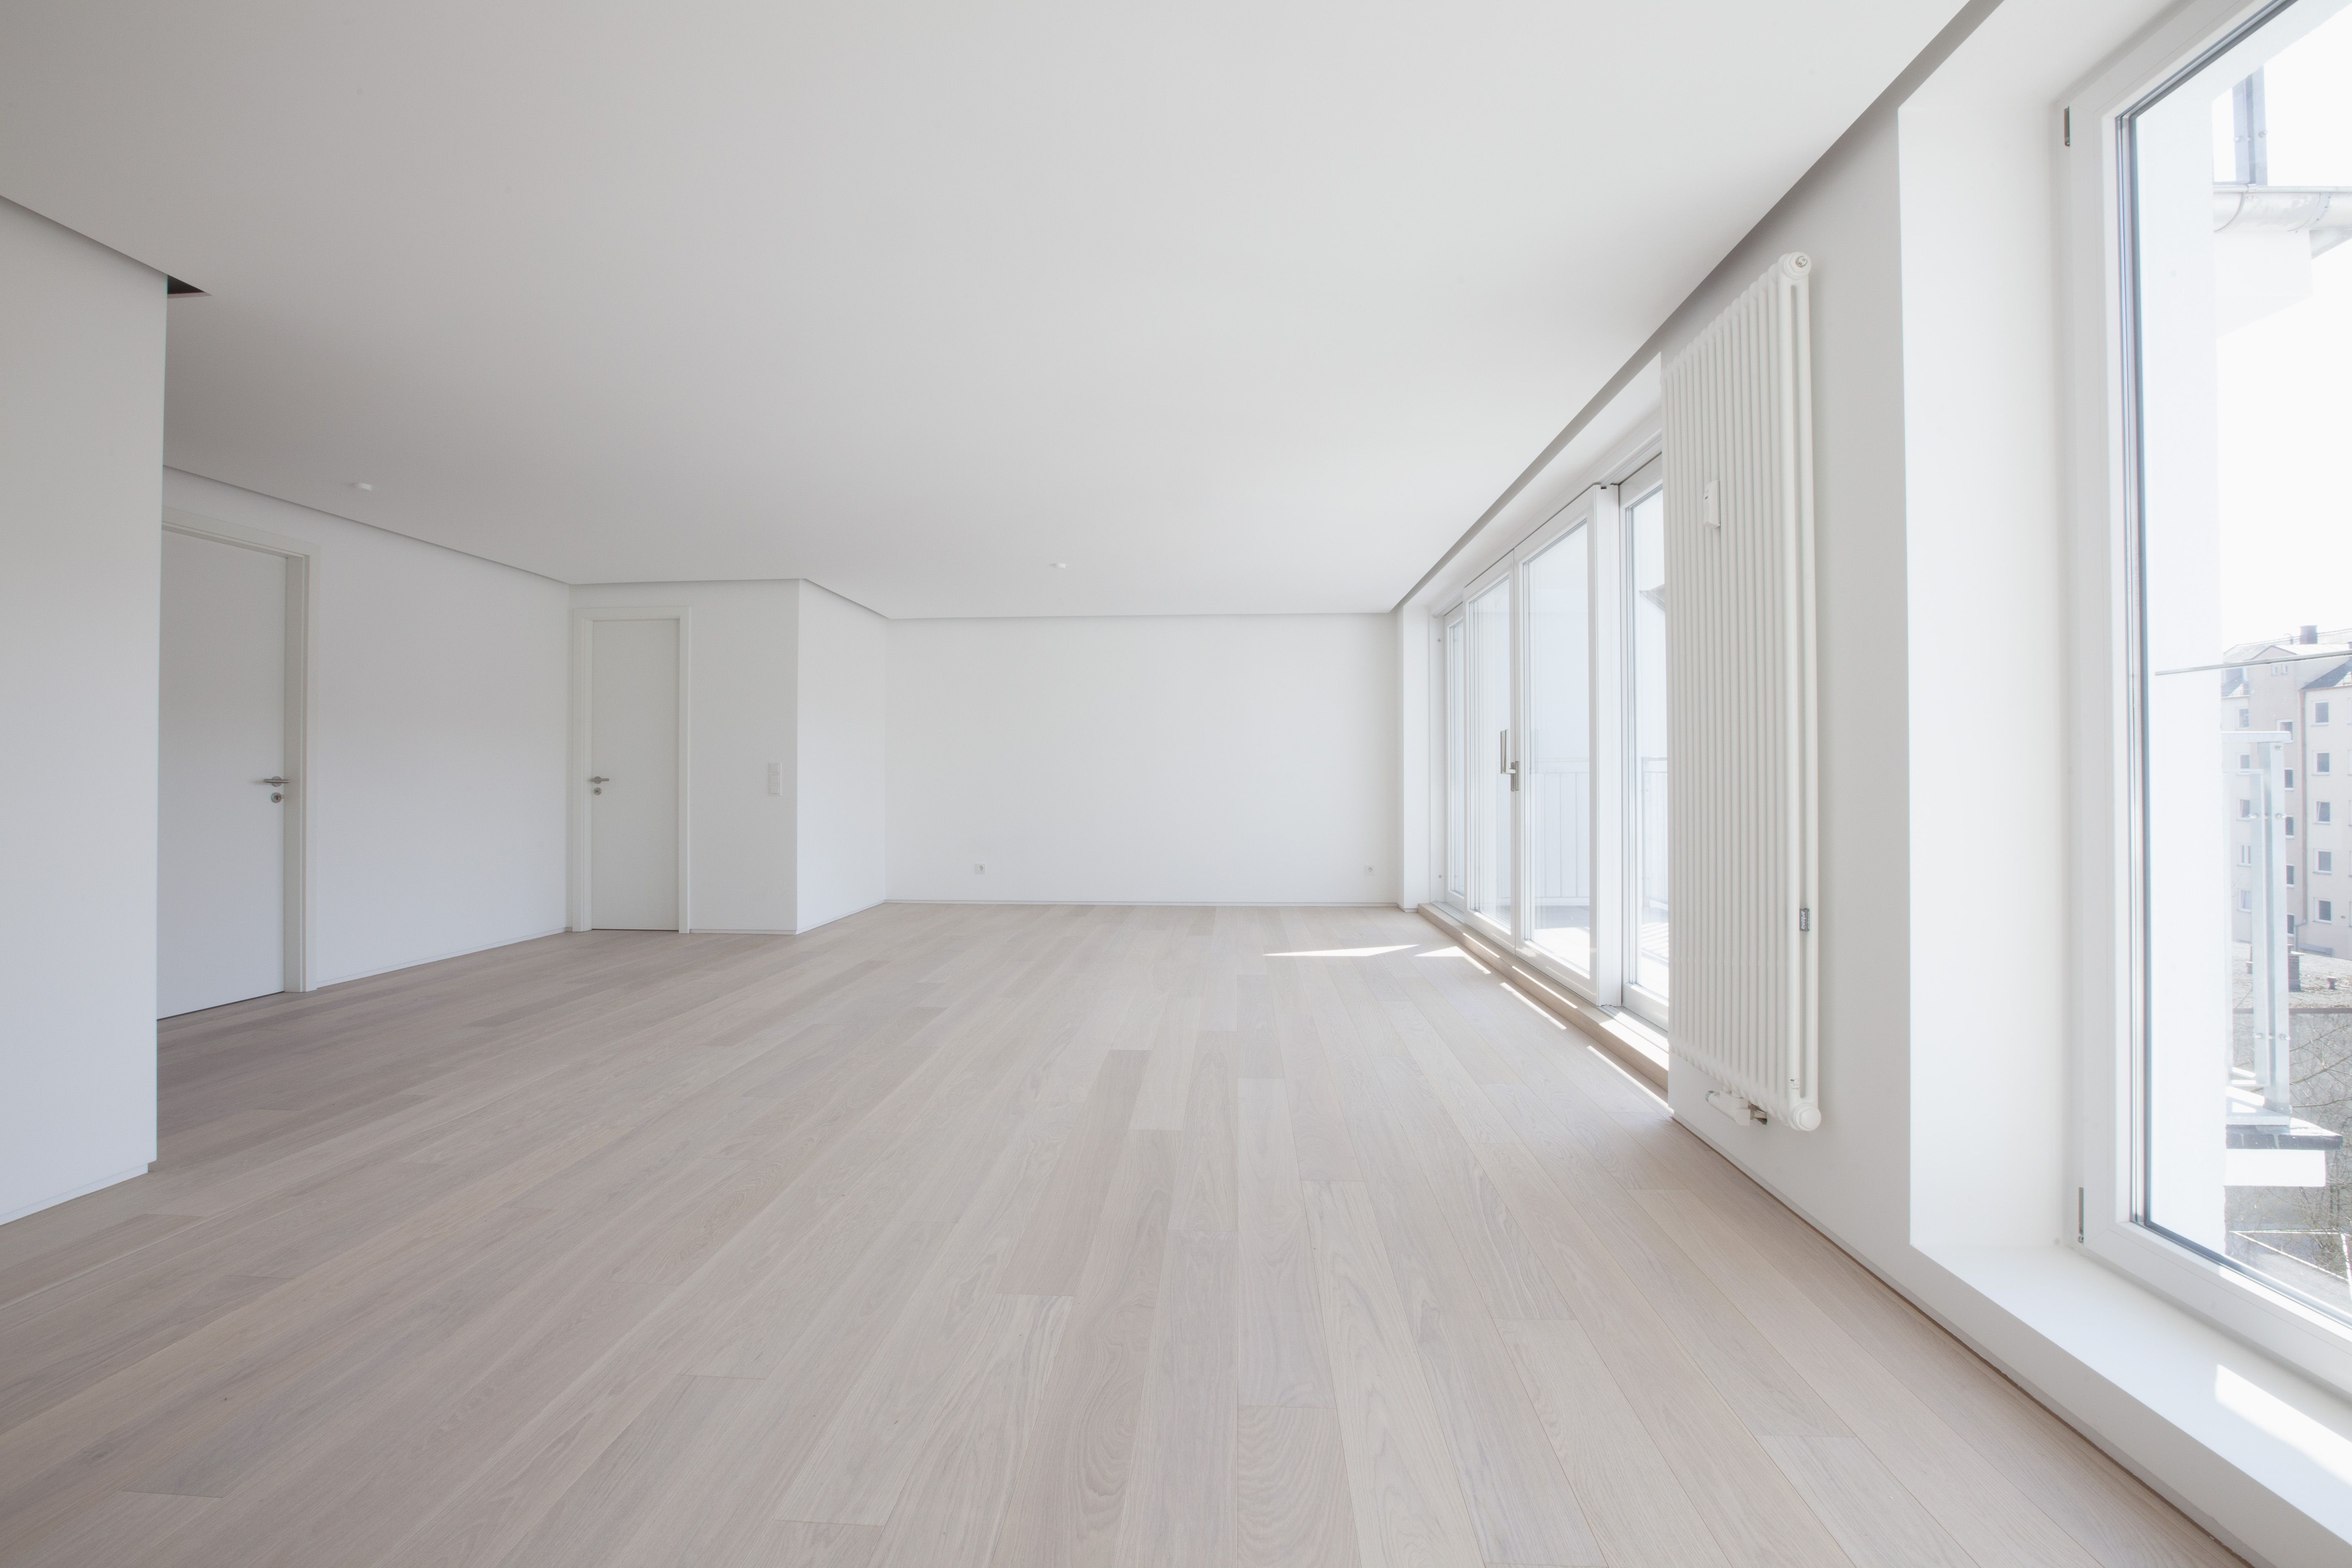 30 Unique Unfinished Engineered Hardwood Flooring Manufacturers 2024 free download unfinished engineered hardwood flooring manufacturers of basics of favorite hybrid engineered wood floors with empty living room in modern apartment 578189139 58866f903df78c2ccdecab05